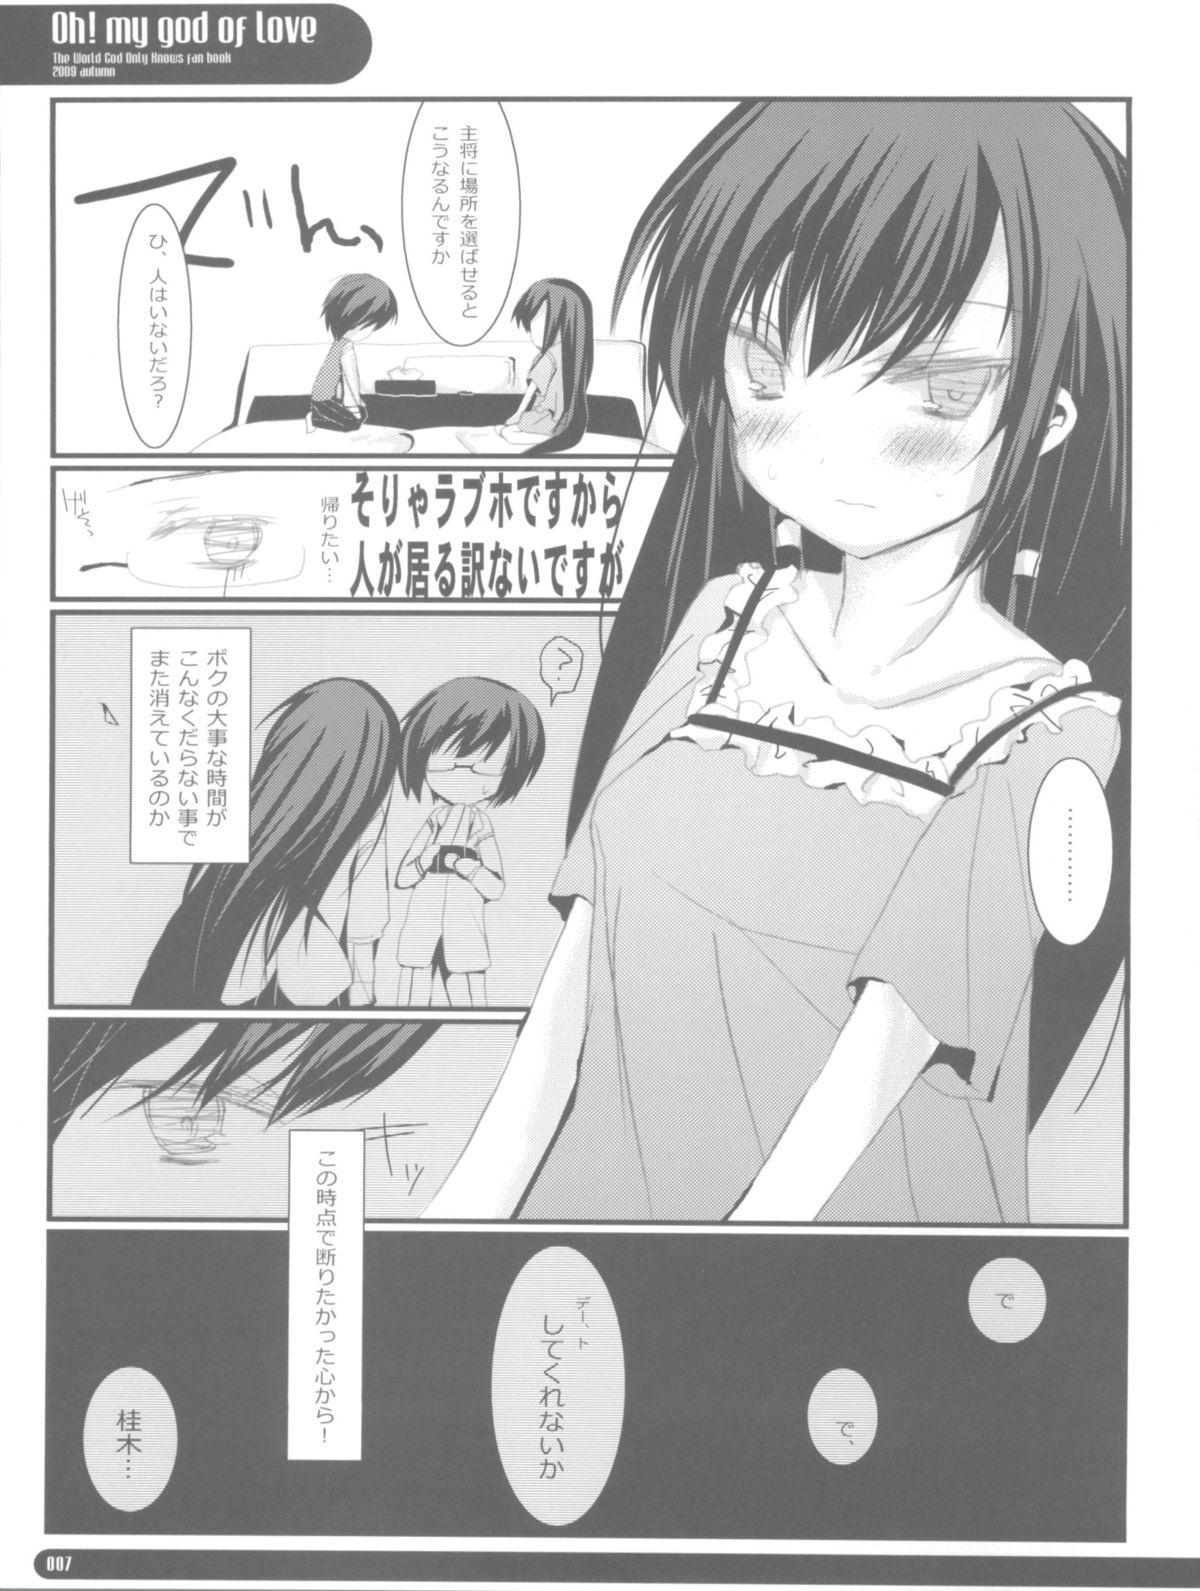 Vagina OH!MY GOD OF LOVE - The world god only knows Load - Page 7